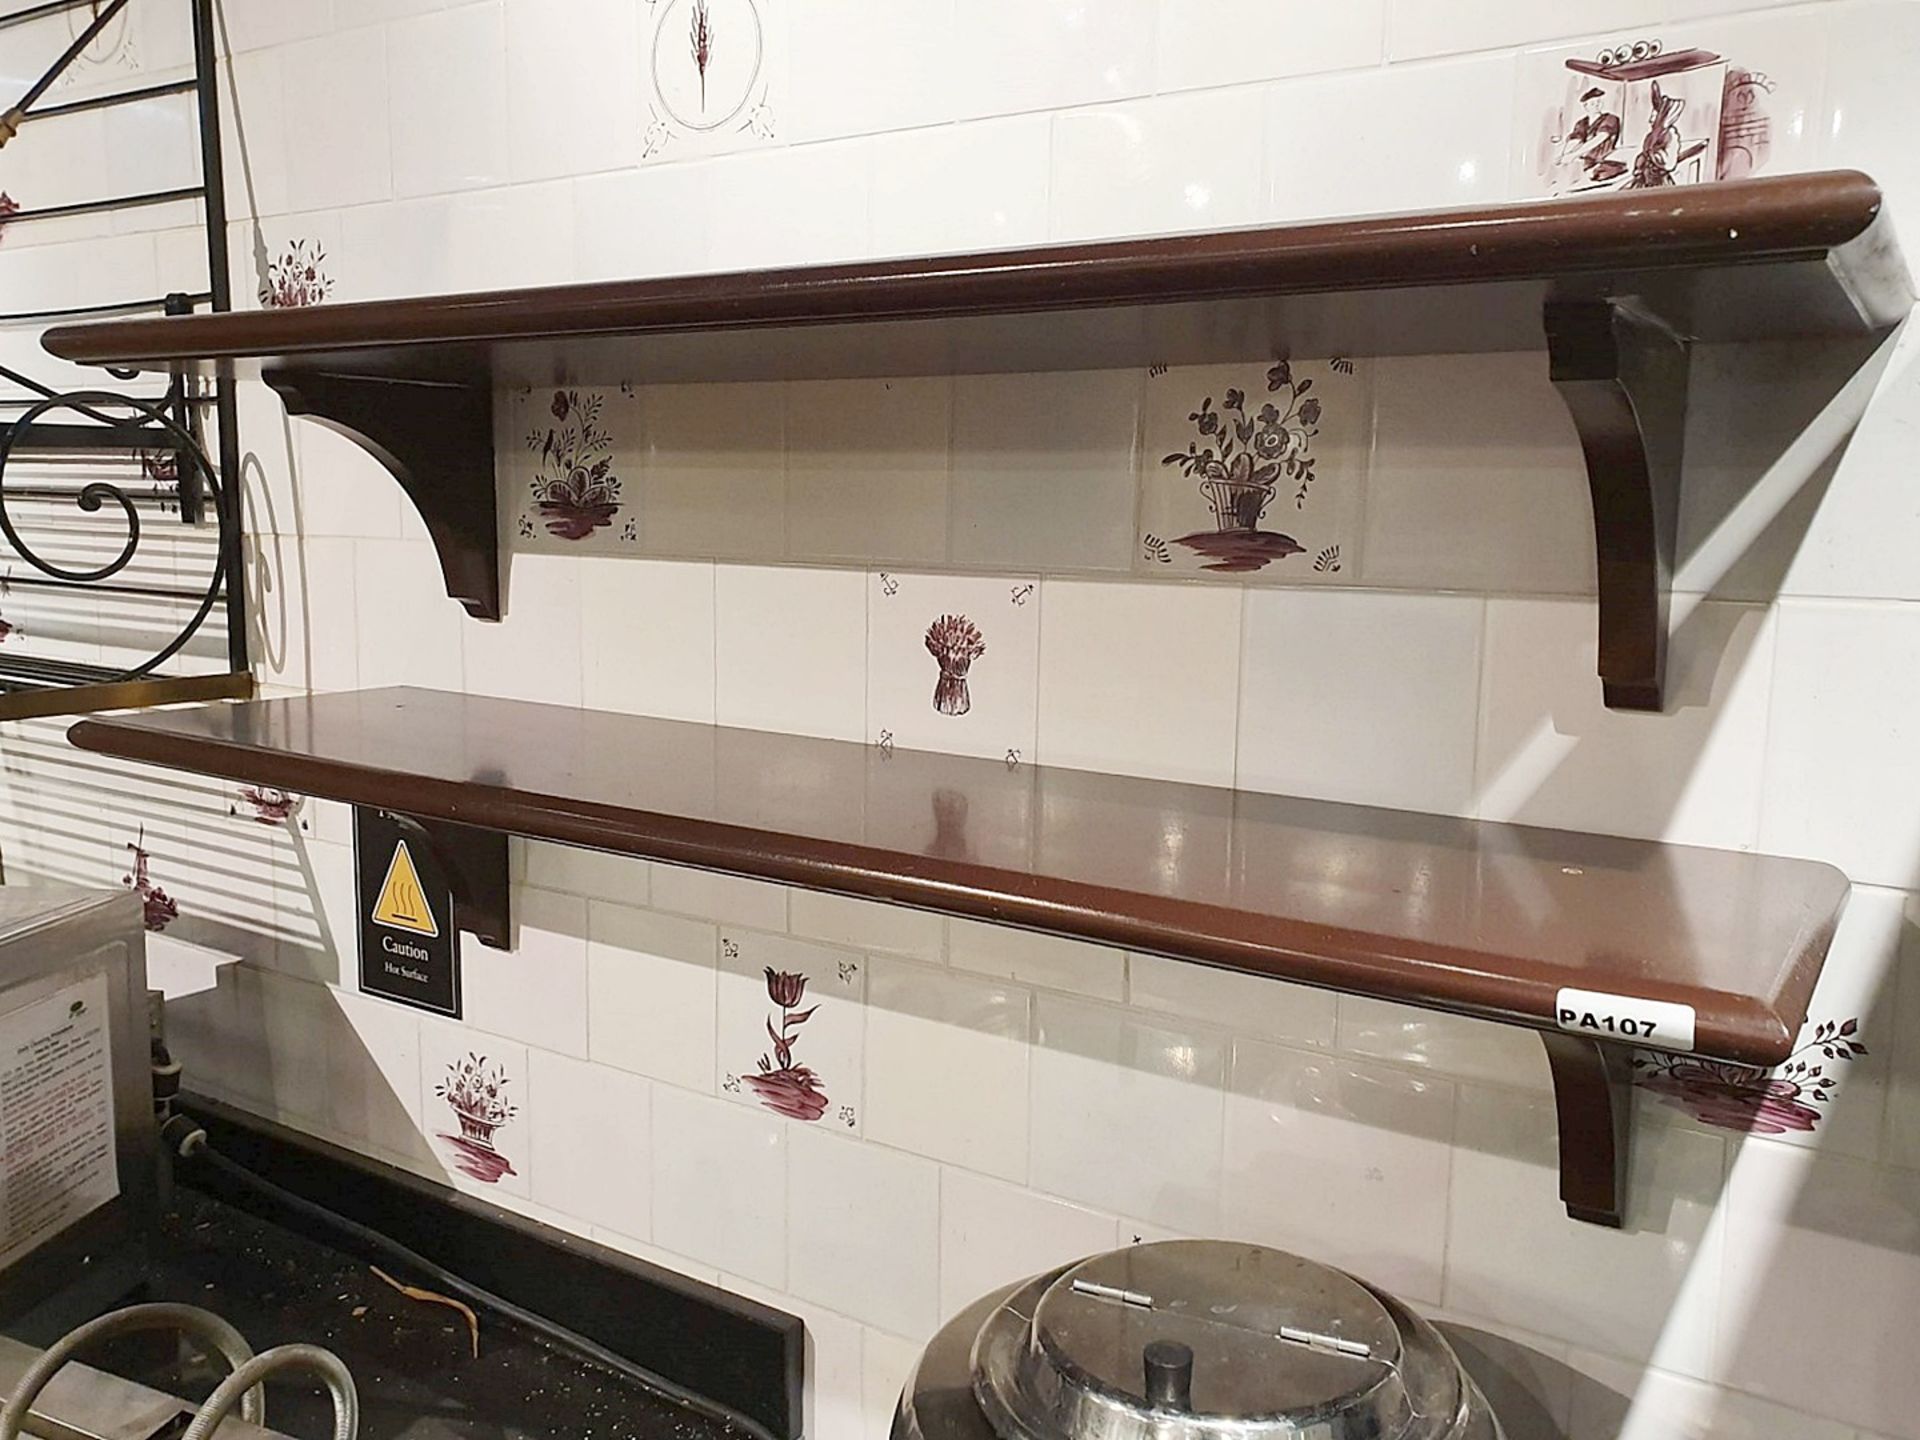 2 x Wall Mounted Wooden Shelves - W120 x D30 cms - Ref PA107 - CL463 - Location: Altrincham WA14